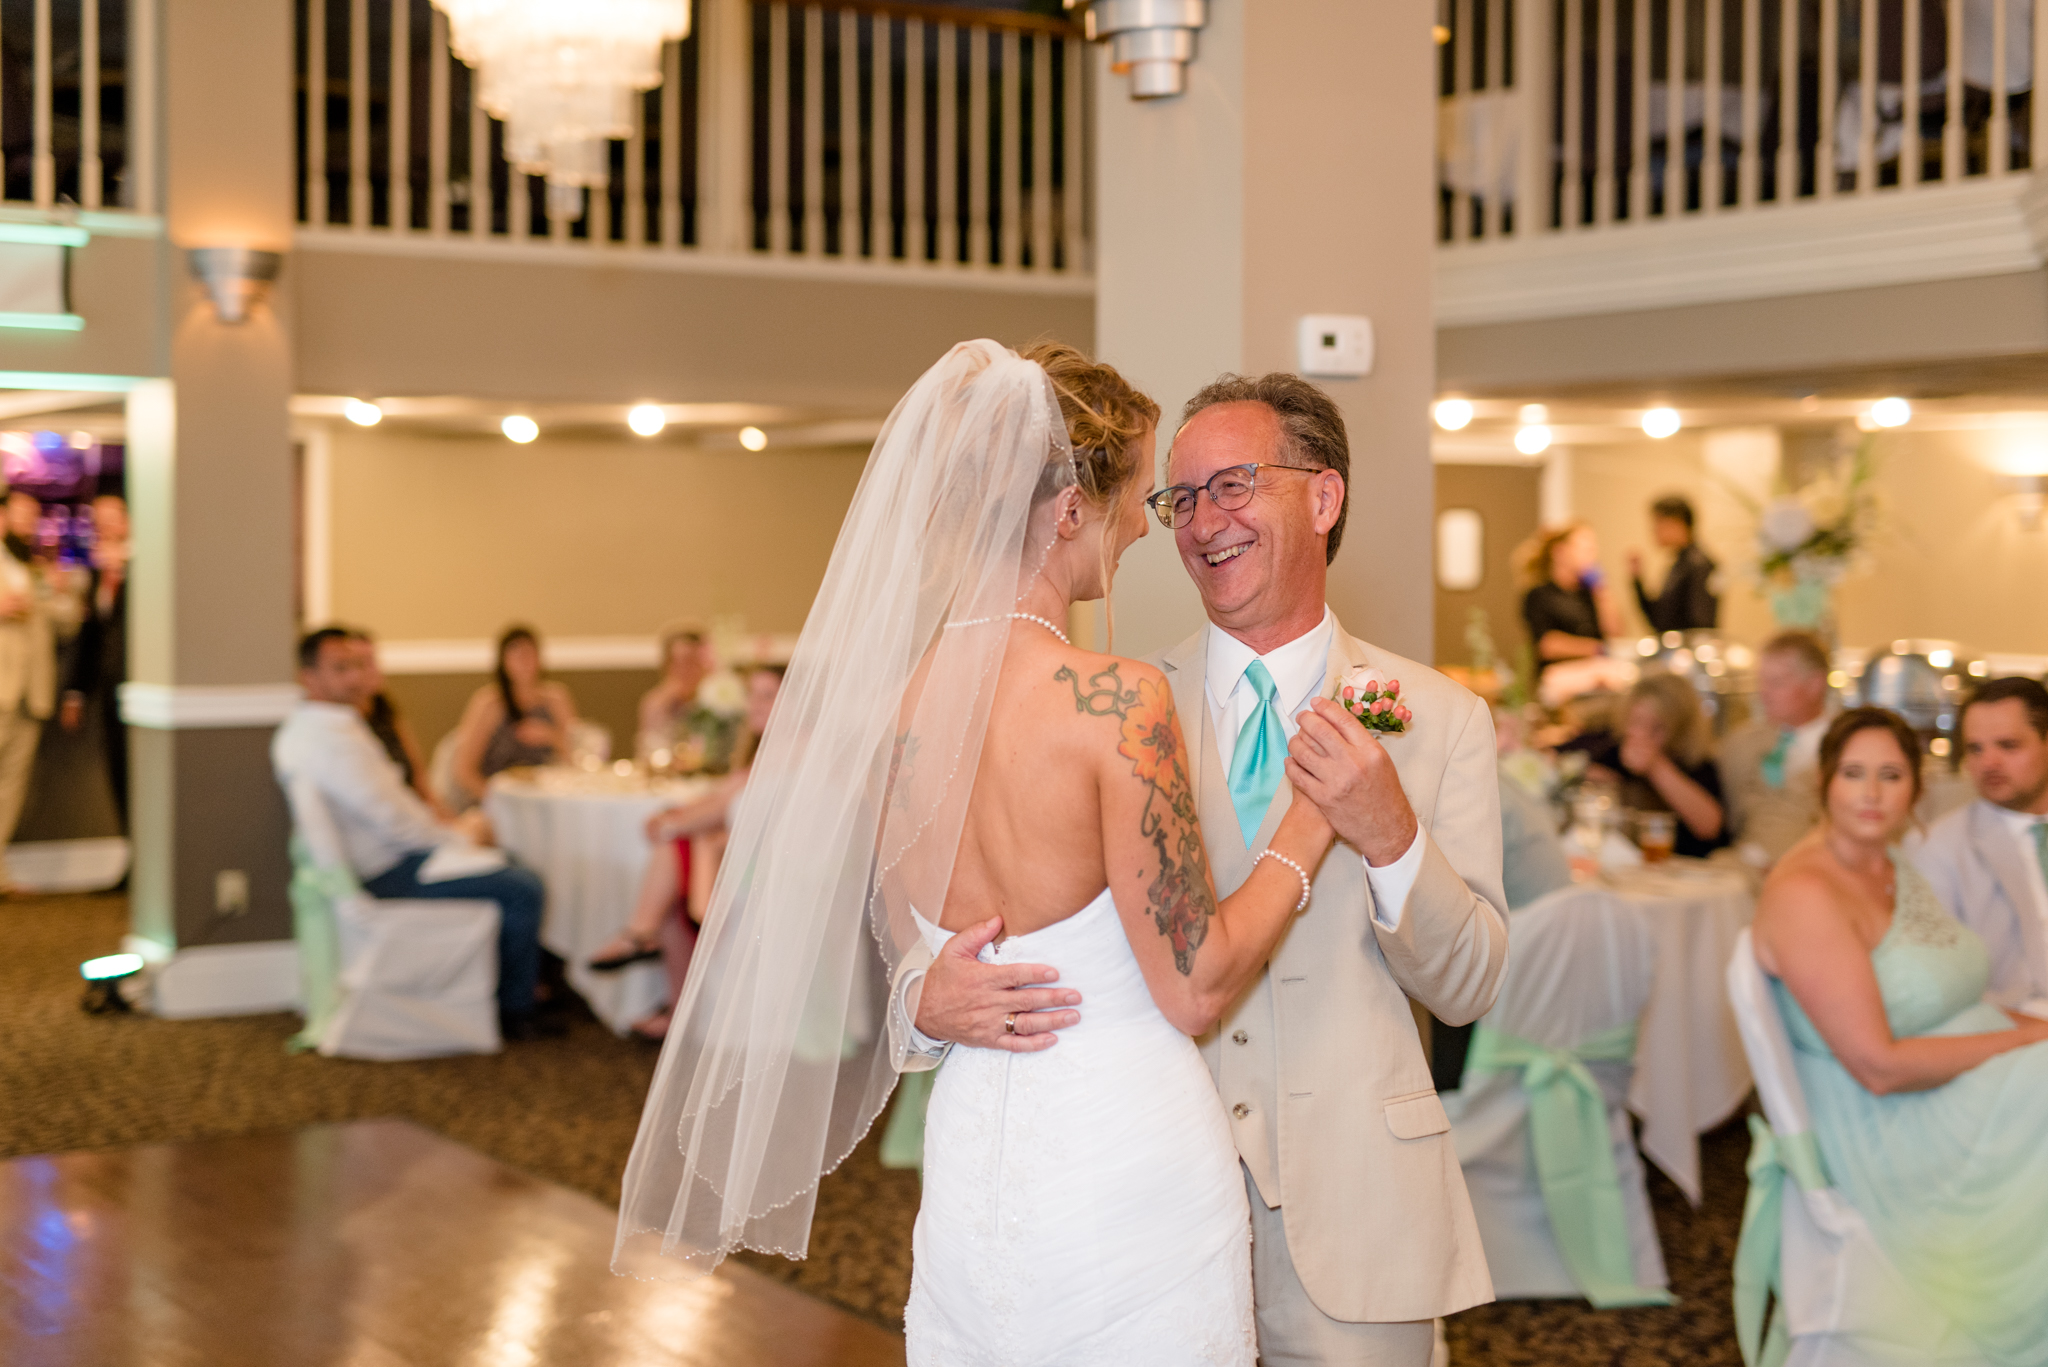 Bride dances with father at wedding reception.